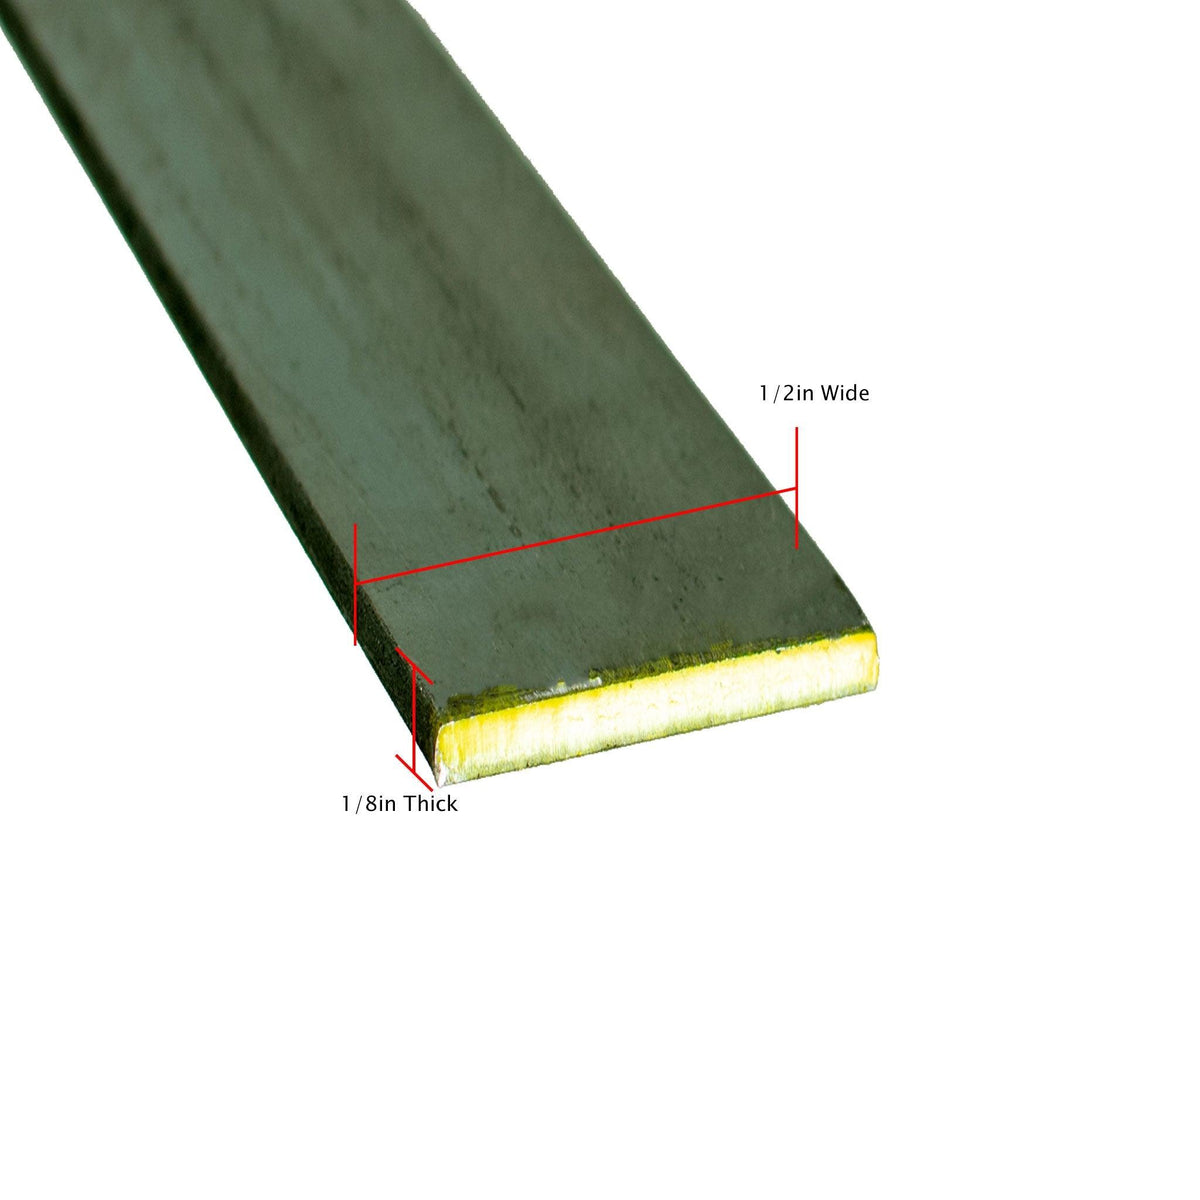 Hot Rolled Flat Bar Steel Raw Materials Sold at Lee Display - 1/2in X 3FT